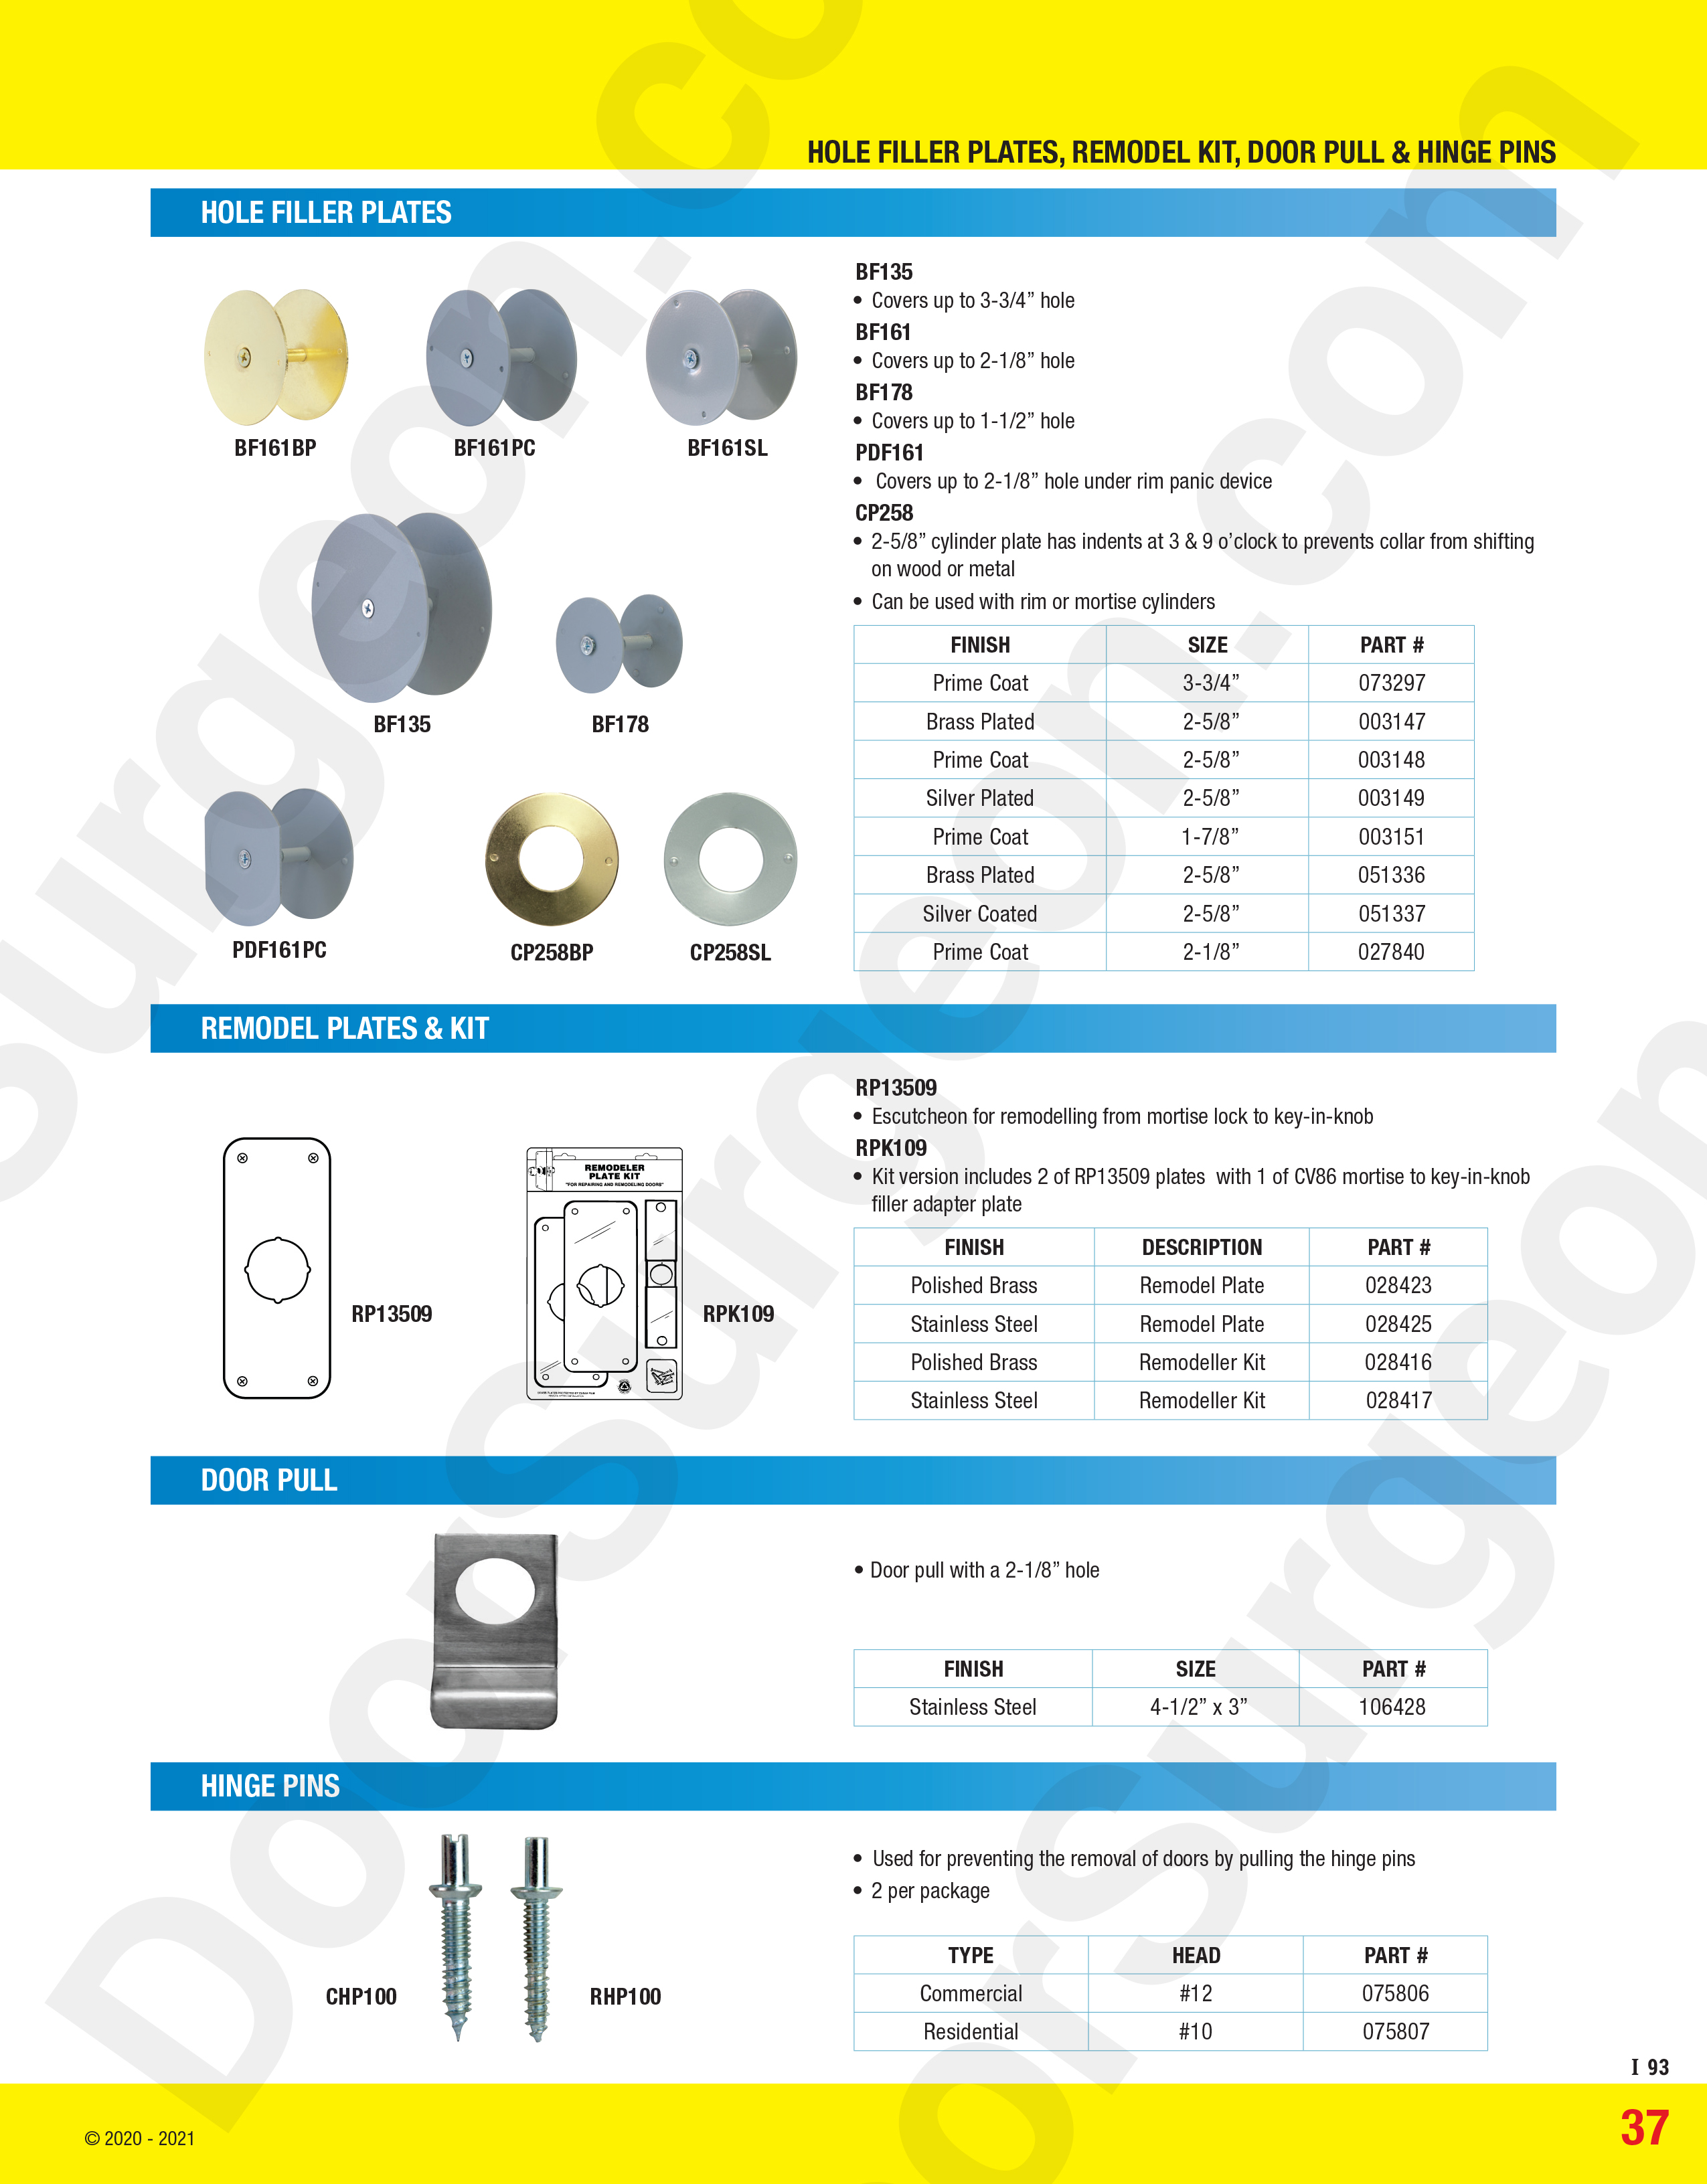 Hole filler plates remodel plates kit door pulls hinge pins parts and service centre south edmonton.